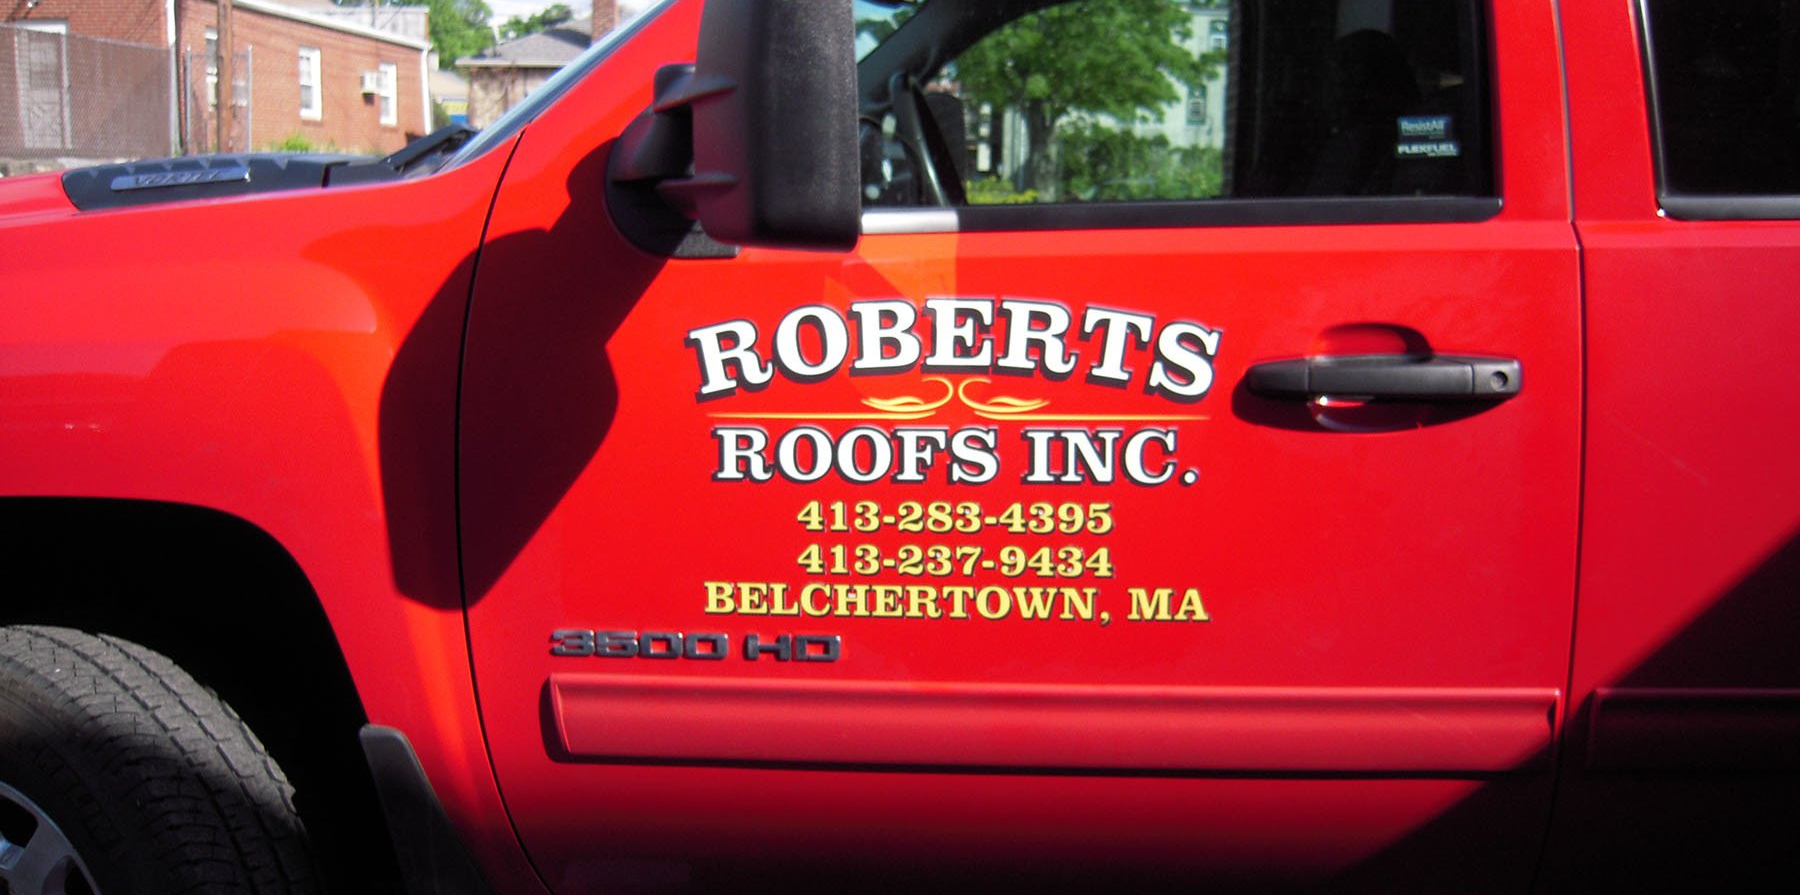 Roberts Roofs Inc side of their work truck in Belchertown, MA